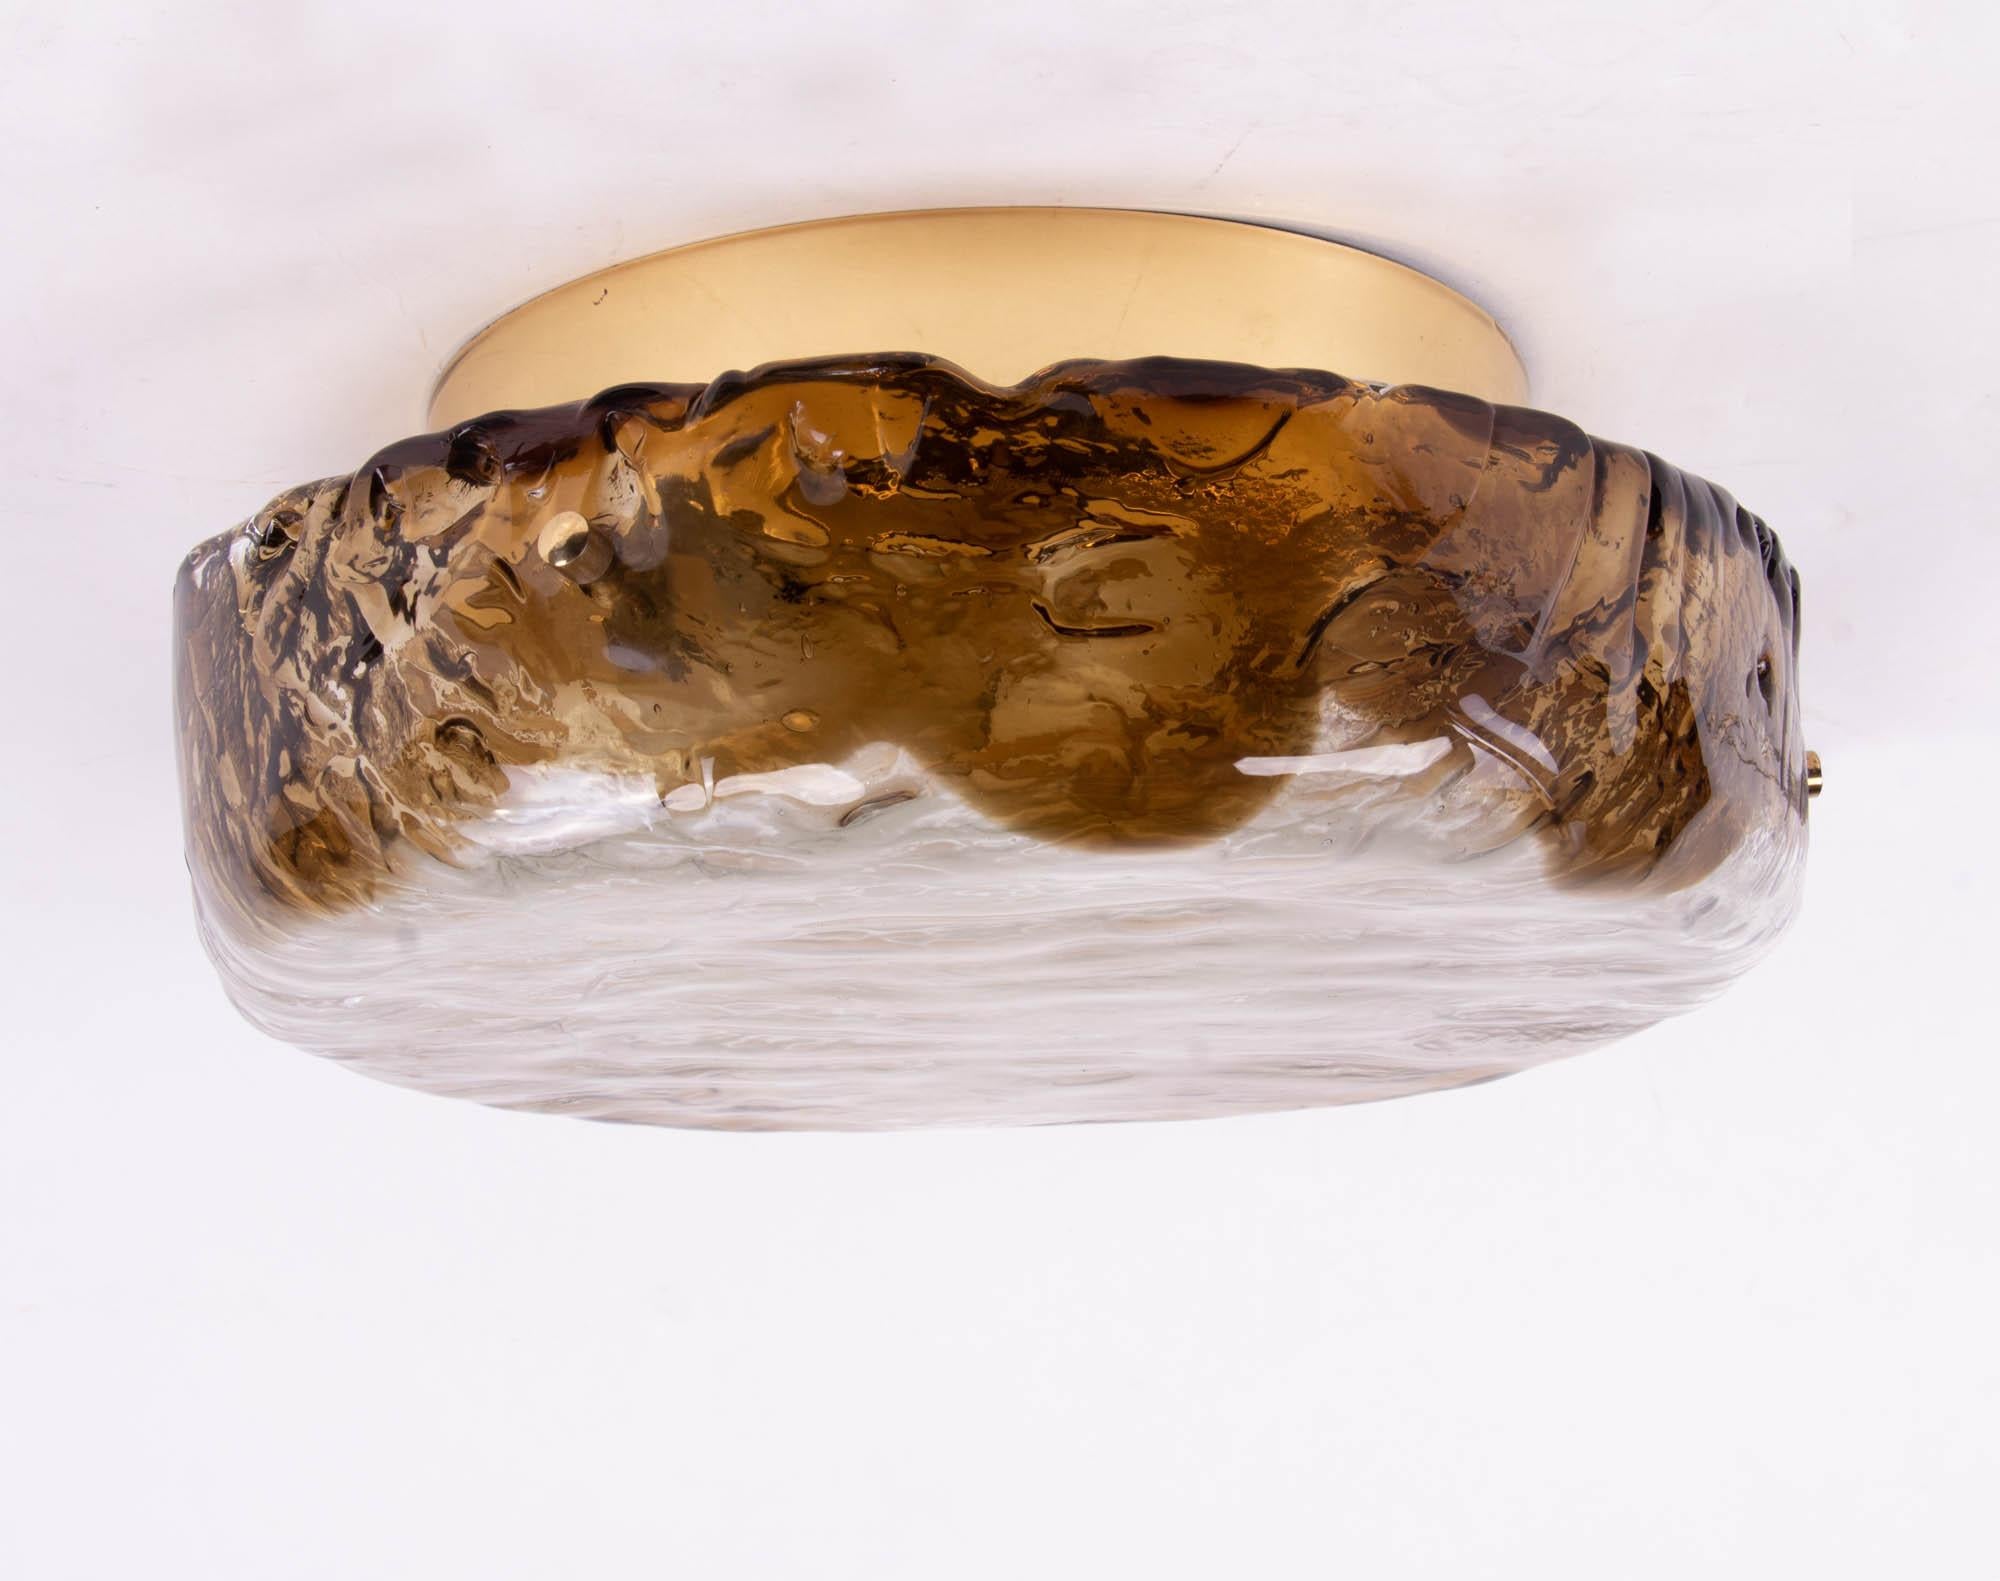 Elegant ceiling light executed in amber and clear Murano glass on a brass frame. Manufactured by Hillebrand, Germany in the 1960s. 

Materials: Murano glass and brass. 
Colors: amber, clear and golden. 
Measures: diameter 13.4